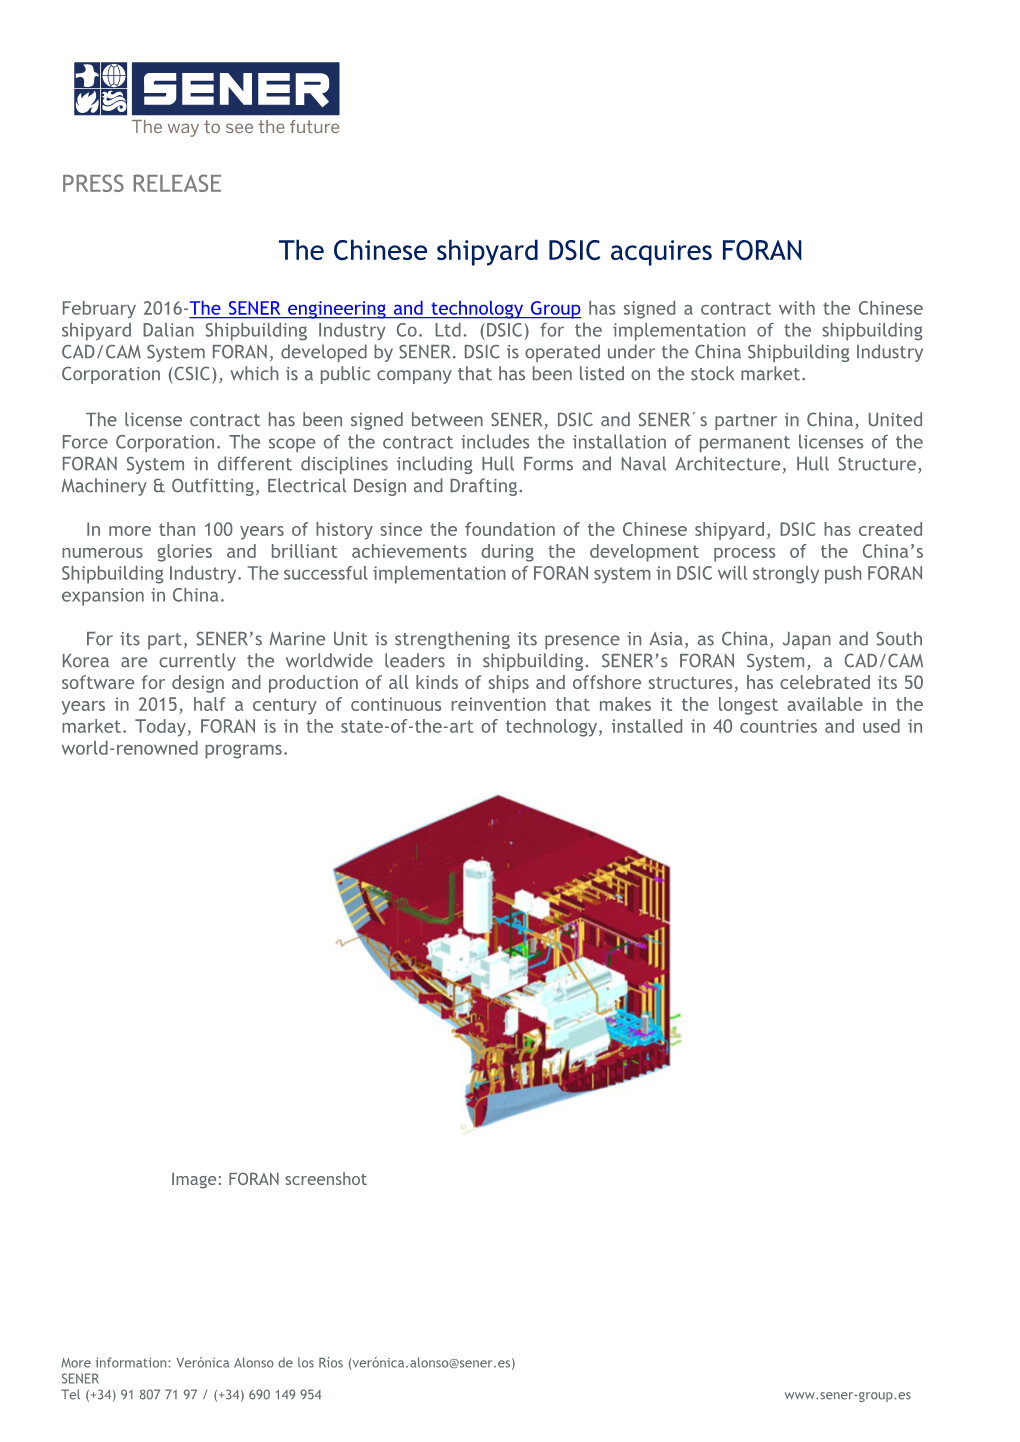 The Chinese Shipyard DSIC Acquires FORAN